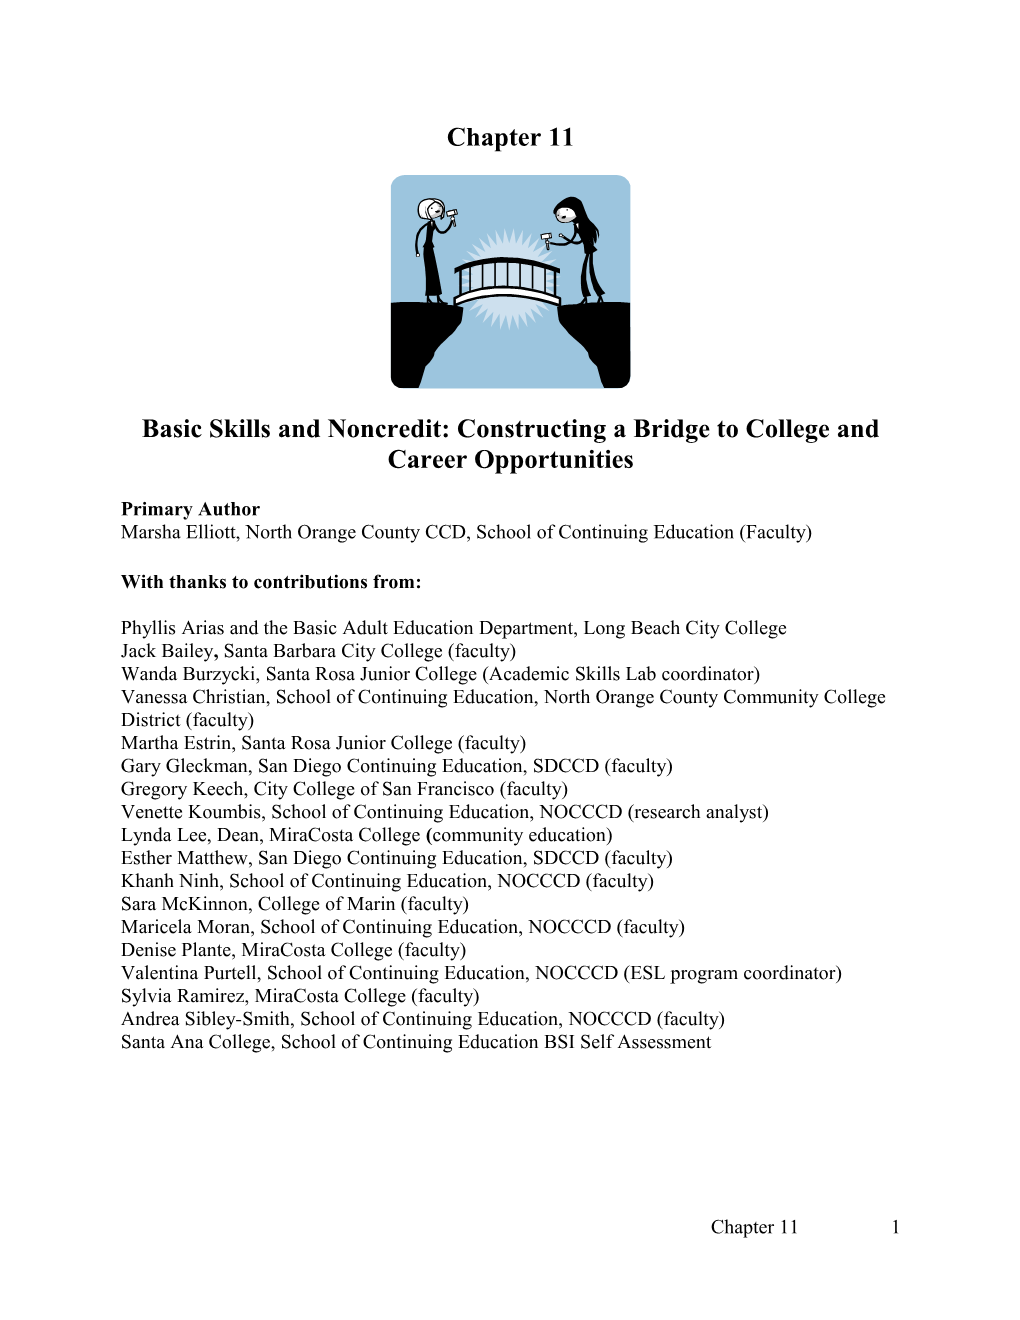 Basic Skills and Noncredit: Constructing a Bridge to College and Career Opportunities